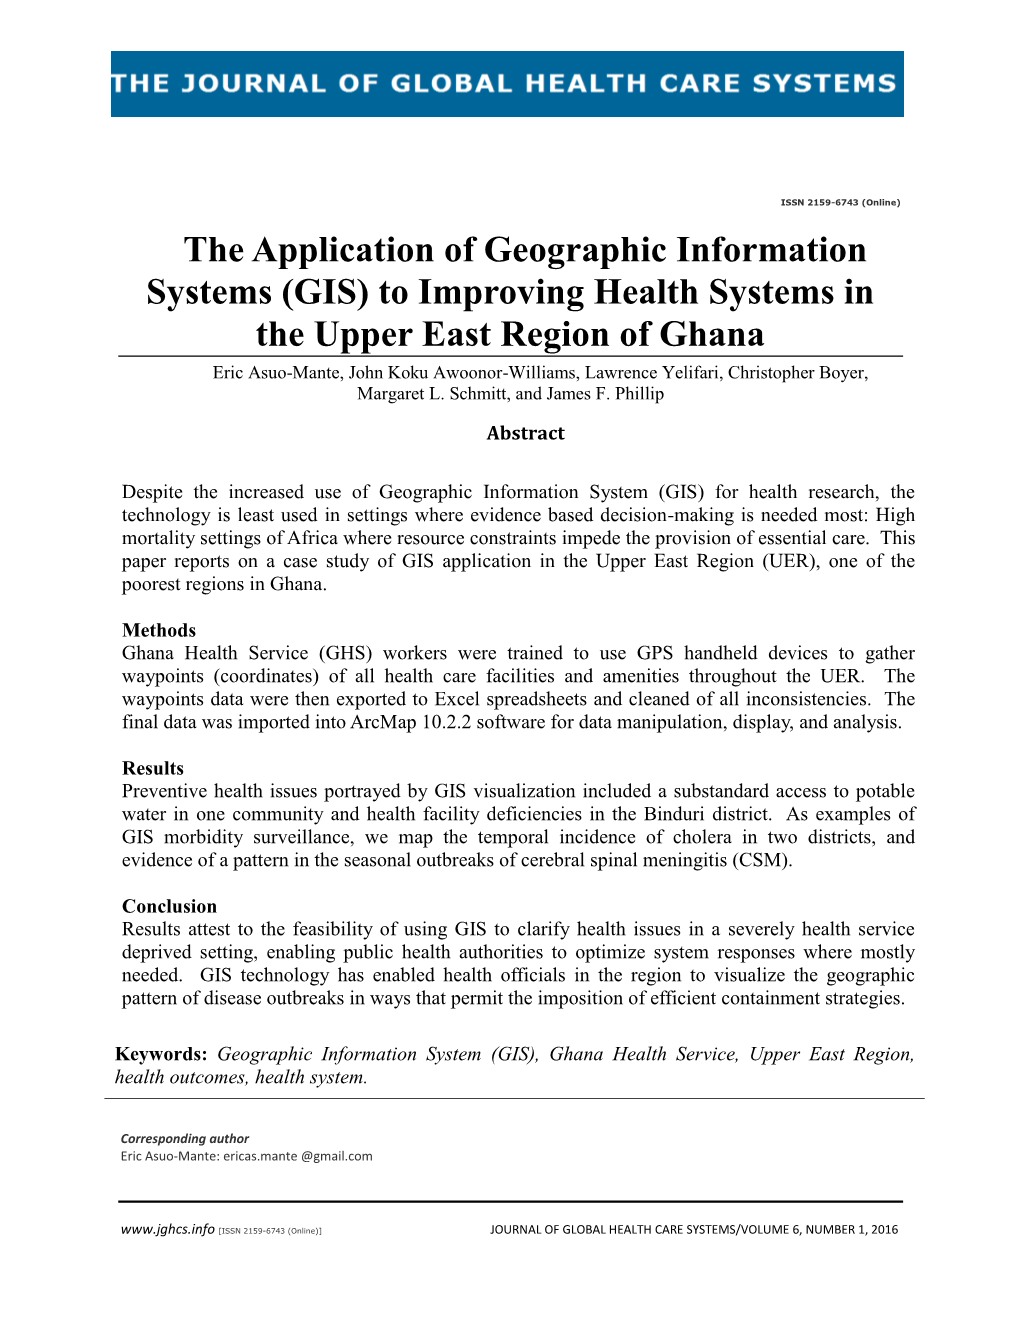 The Application of Geographic Information Systems (GIS) To